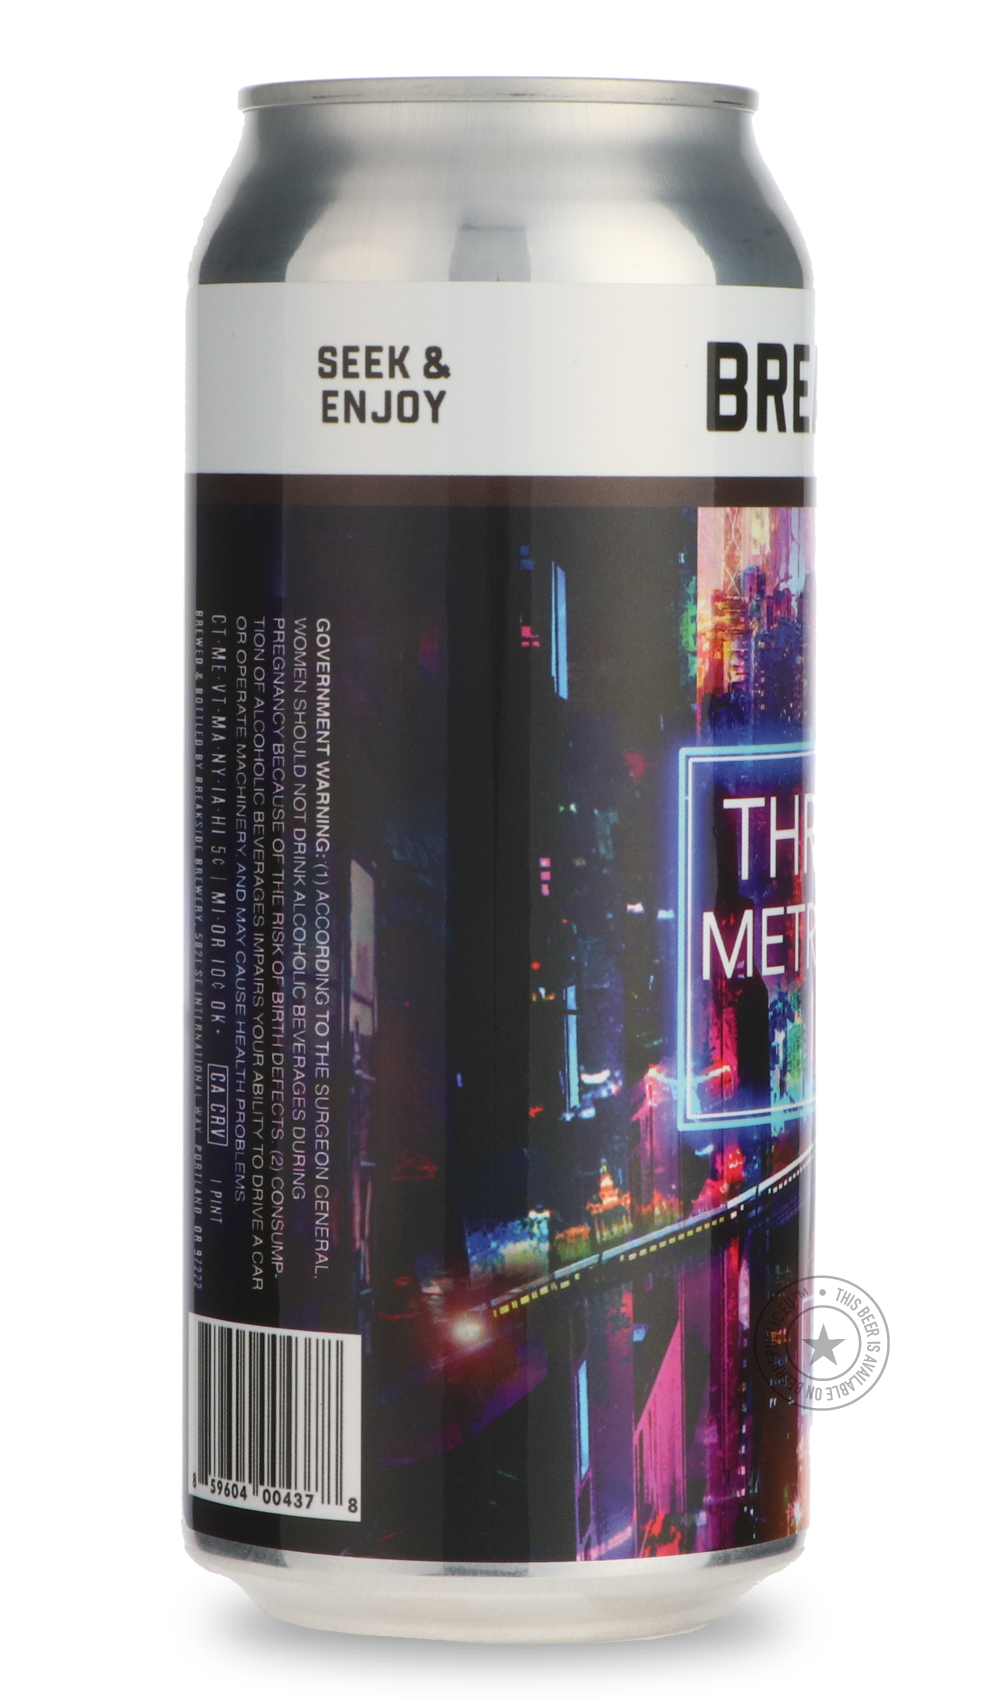 -Breakside- Thriving Metropolis #3 W/ Riwaka & Columbus-IPA- Only @ Beer Republic - The best online beer store for American & Canadian craft beer - Buy beer online from the USA and Canada - Bier online kopen - Amerikaans bier kopen - Craft beer store - Craft beer kopen - Amerikanisch bier kaufen - Bier online kaufen - Acheter biere online - IPA - Stout - Porter - New England IPA - Hazy IPA - Imperial Stout - Barrel Aged - Barrel Aged Imperial Stout - Brown - Dark beer - Blond - Blonde - Pilsner - Lager - Wh